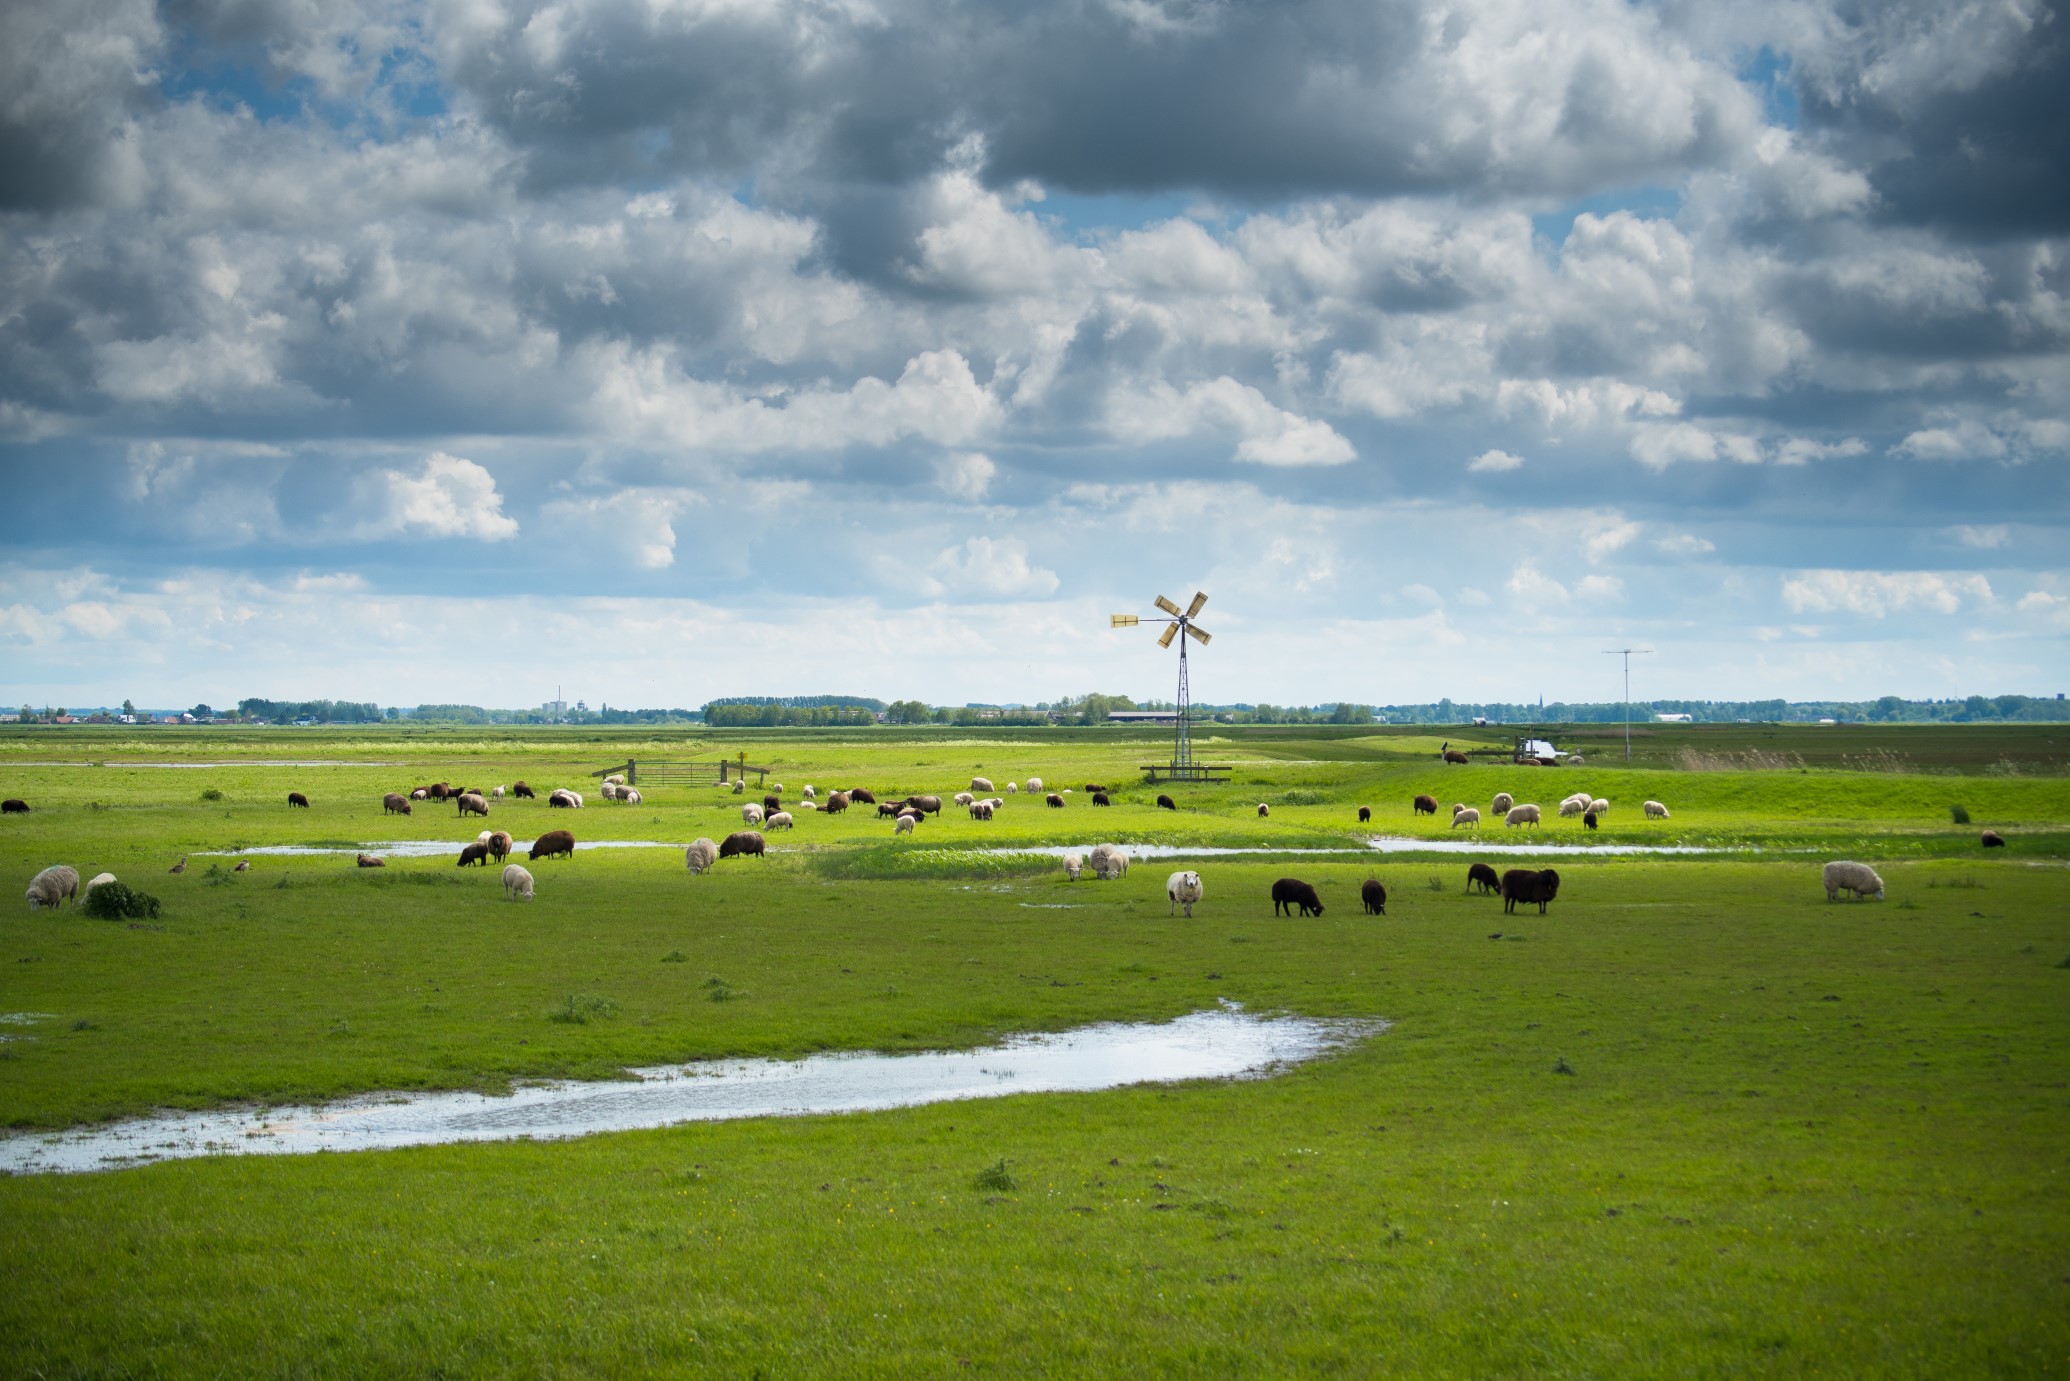 A green meadow with poodles and ditches stretches to the horizon. A flock of white and brown sheep is grazing. A windmill stands in the centre, powering a pumping station.